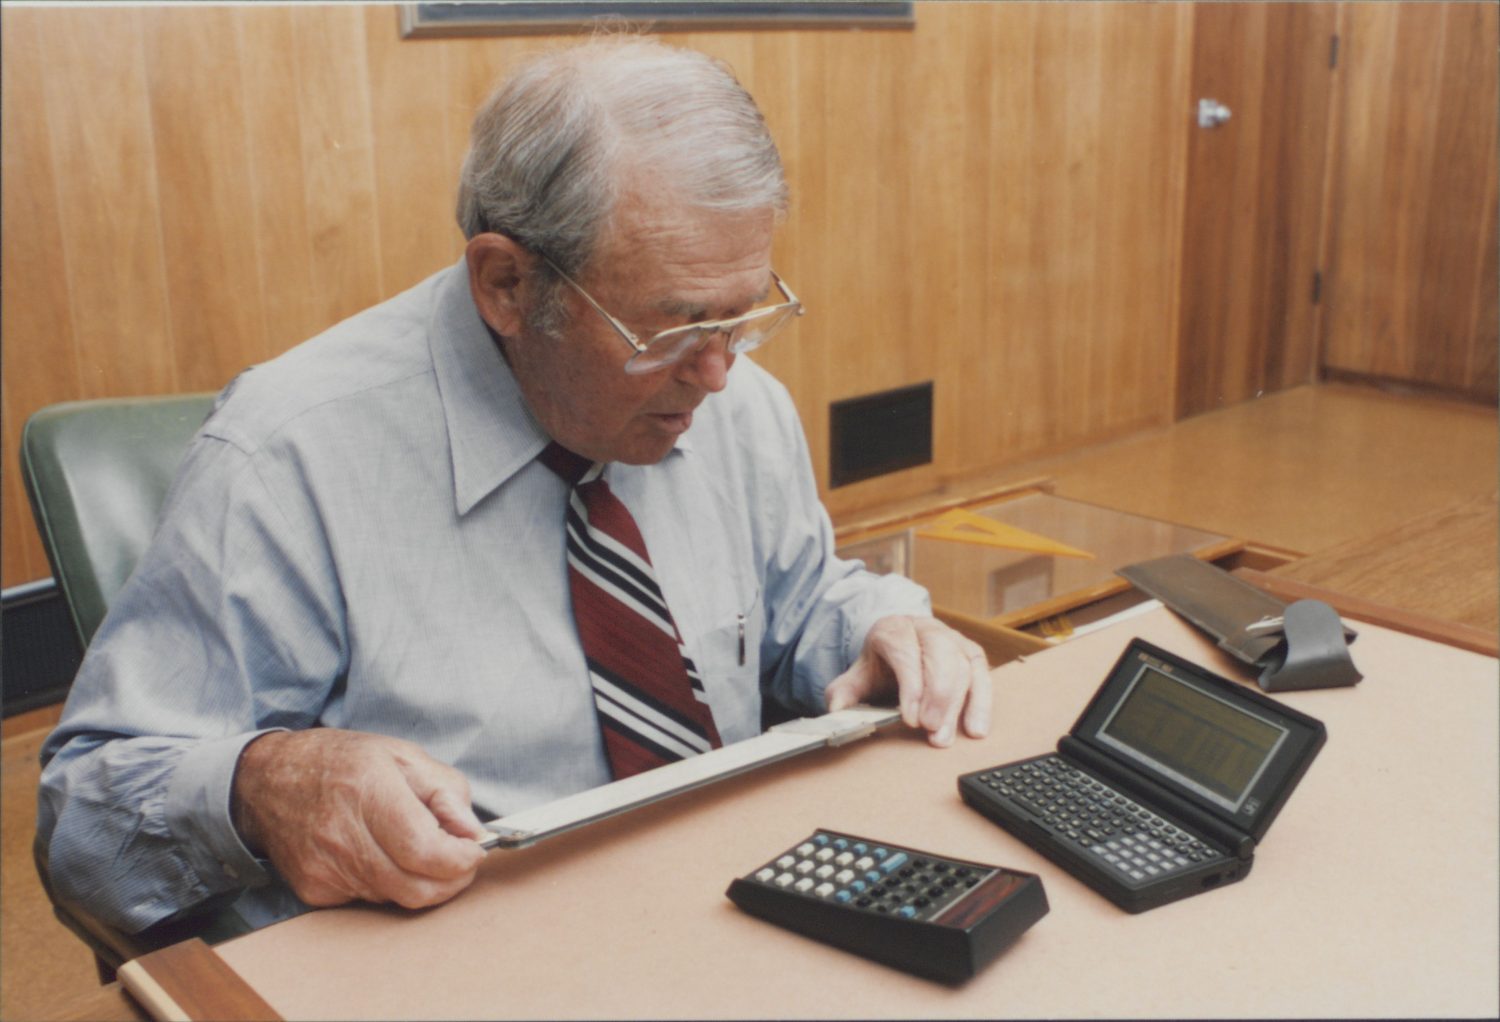 Bill Hewlett with a slide rule in his hand, while an HP 35 and HP 95LX palmtop lay on his desk.